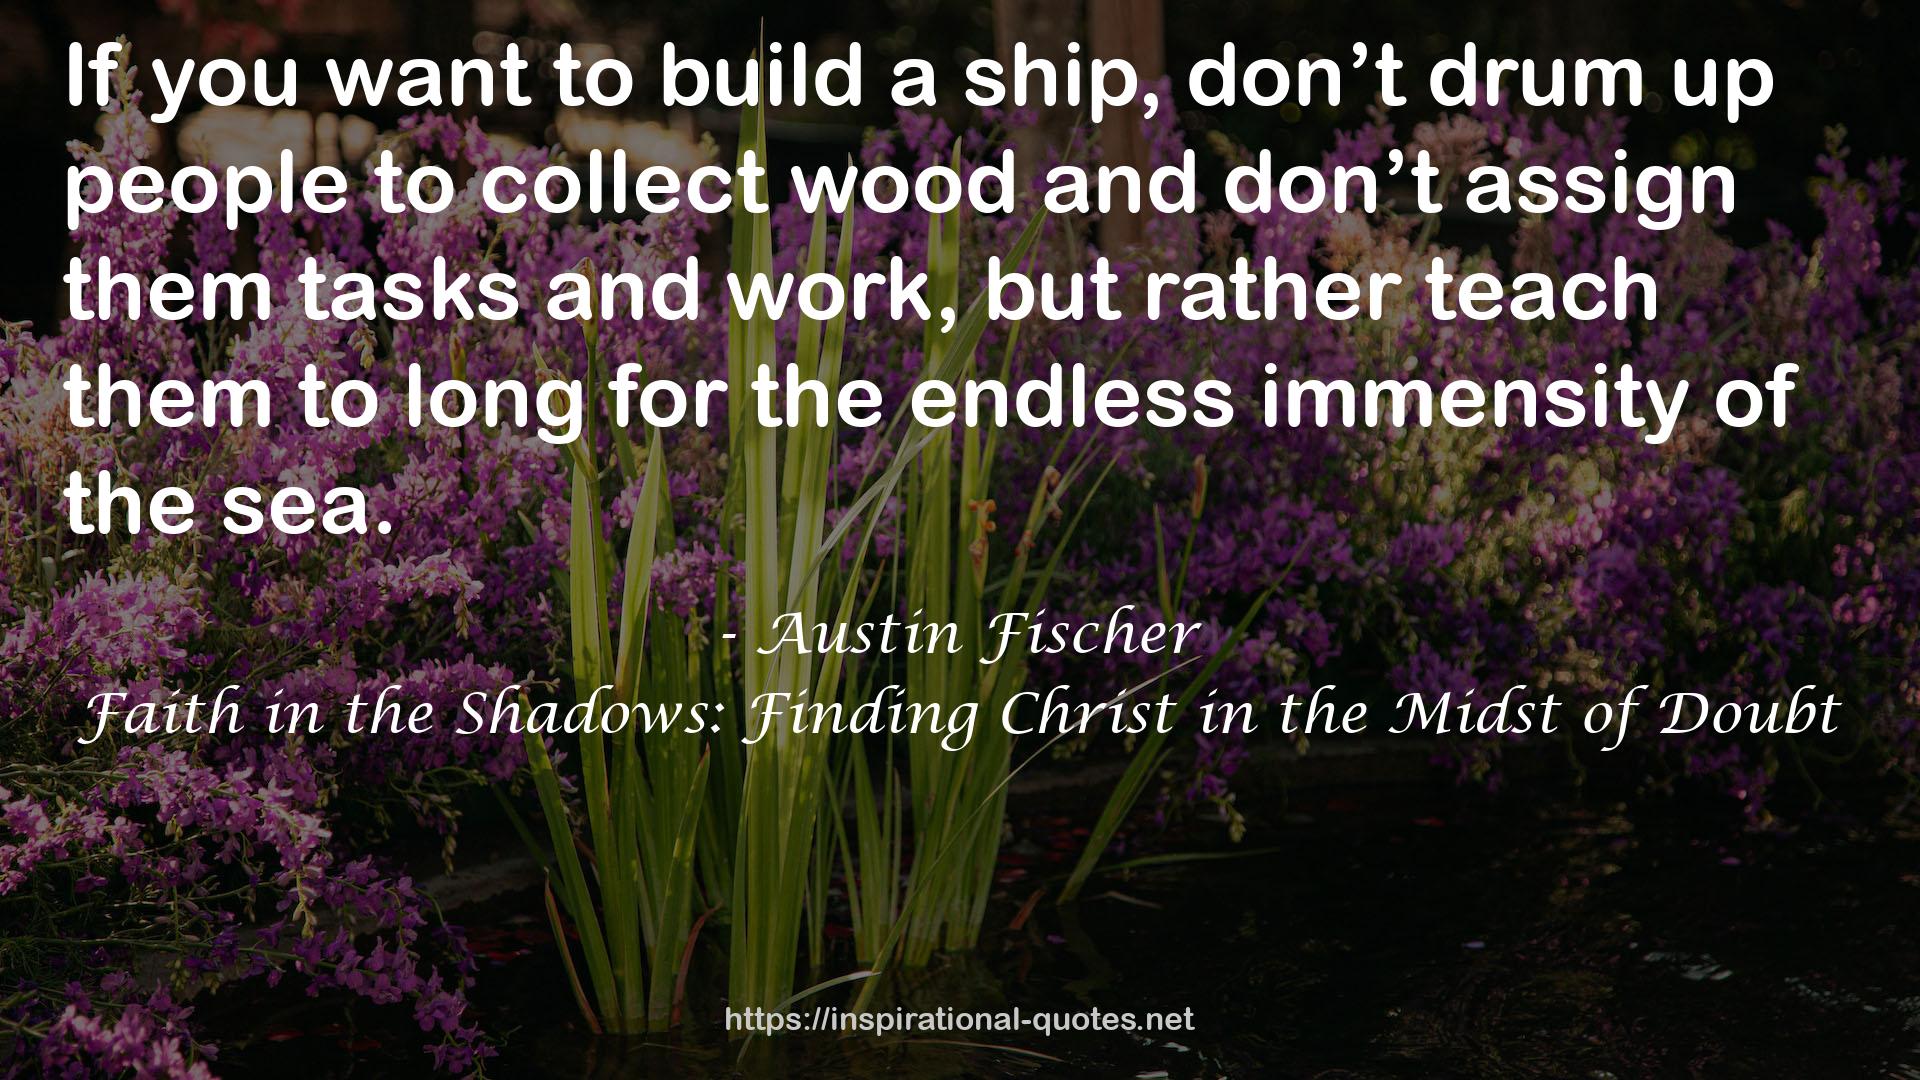 Faith in the Shadows: Finding Christ in the Midst of Doubt QUOTES